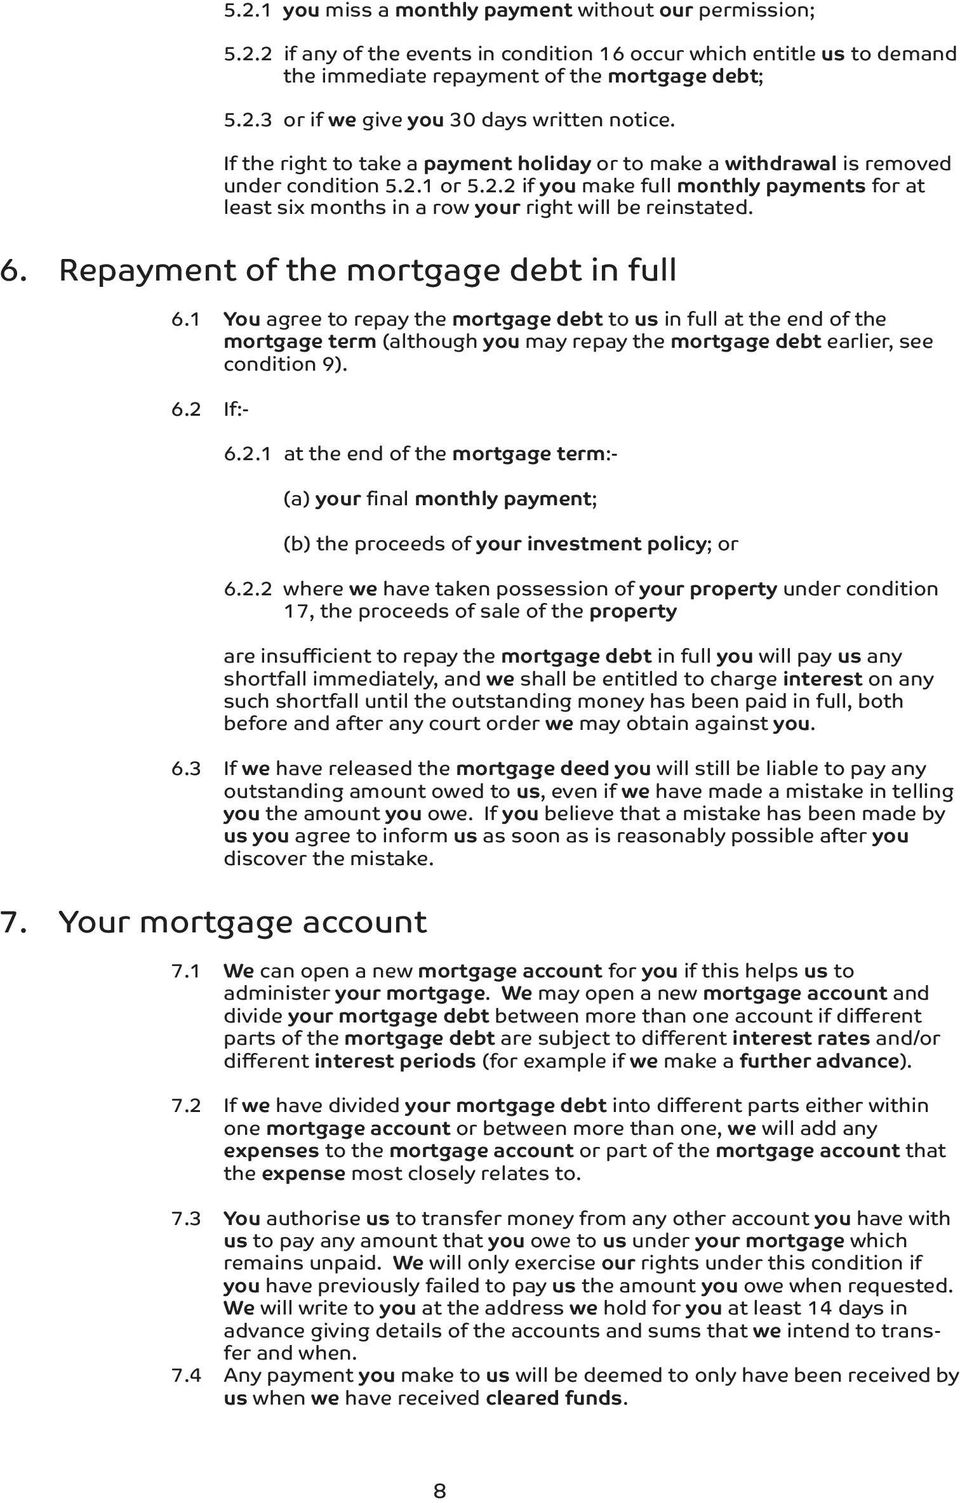 6. Repayment of the mortgage debt in full 6.1 You agree to repay the mortgage debt to us in full at the end of the mortgage term (although you may repay the mortgage debt earlier, see condition 9). 6.2 If:- 6.